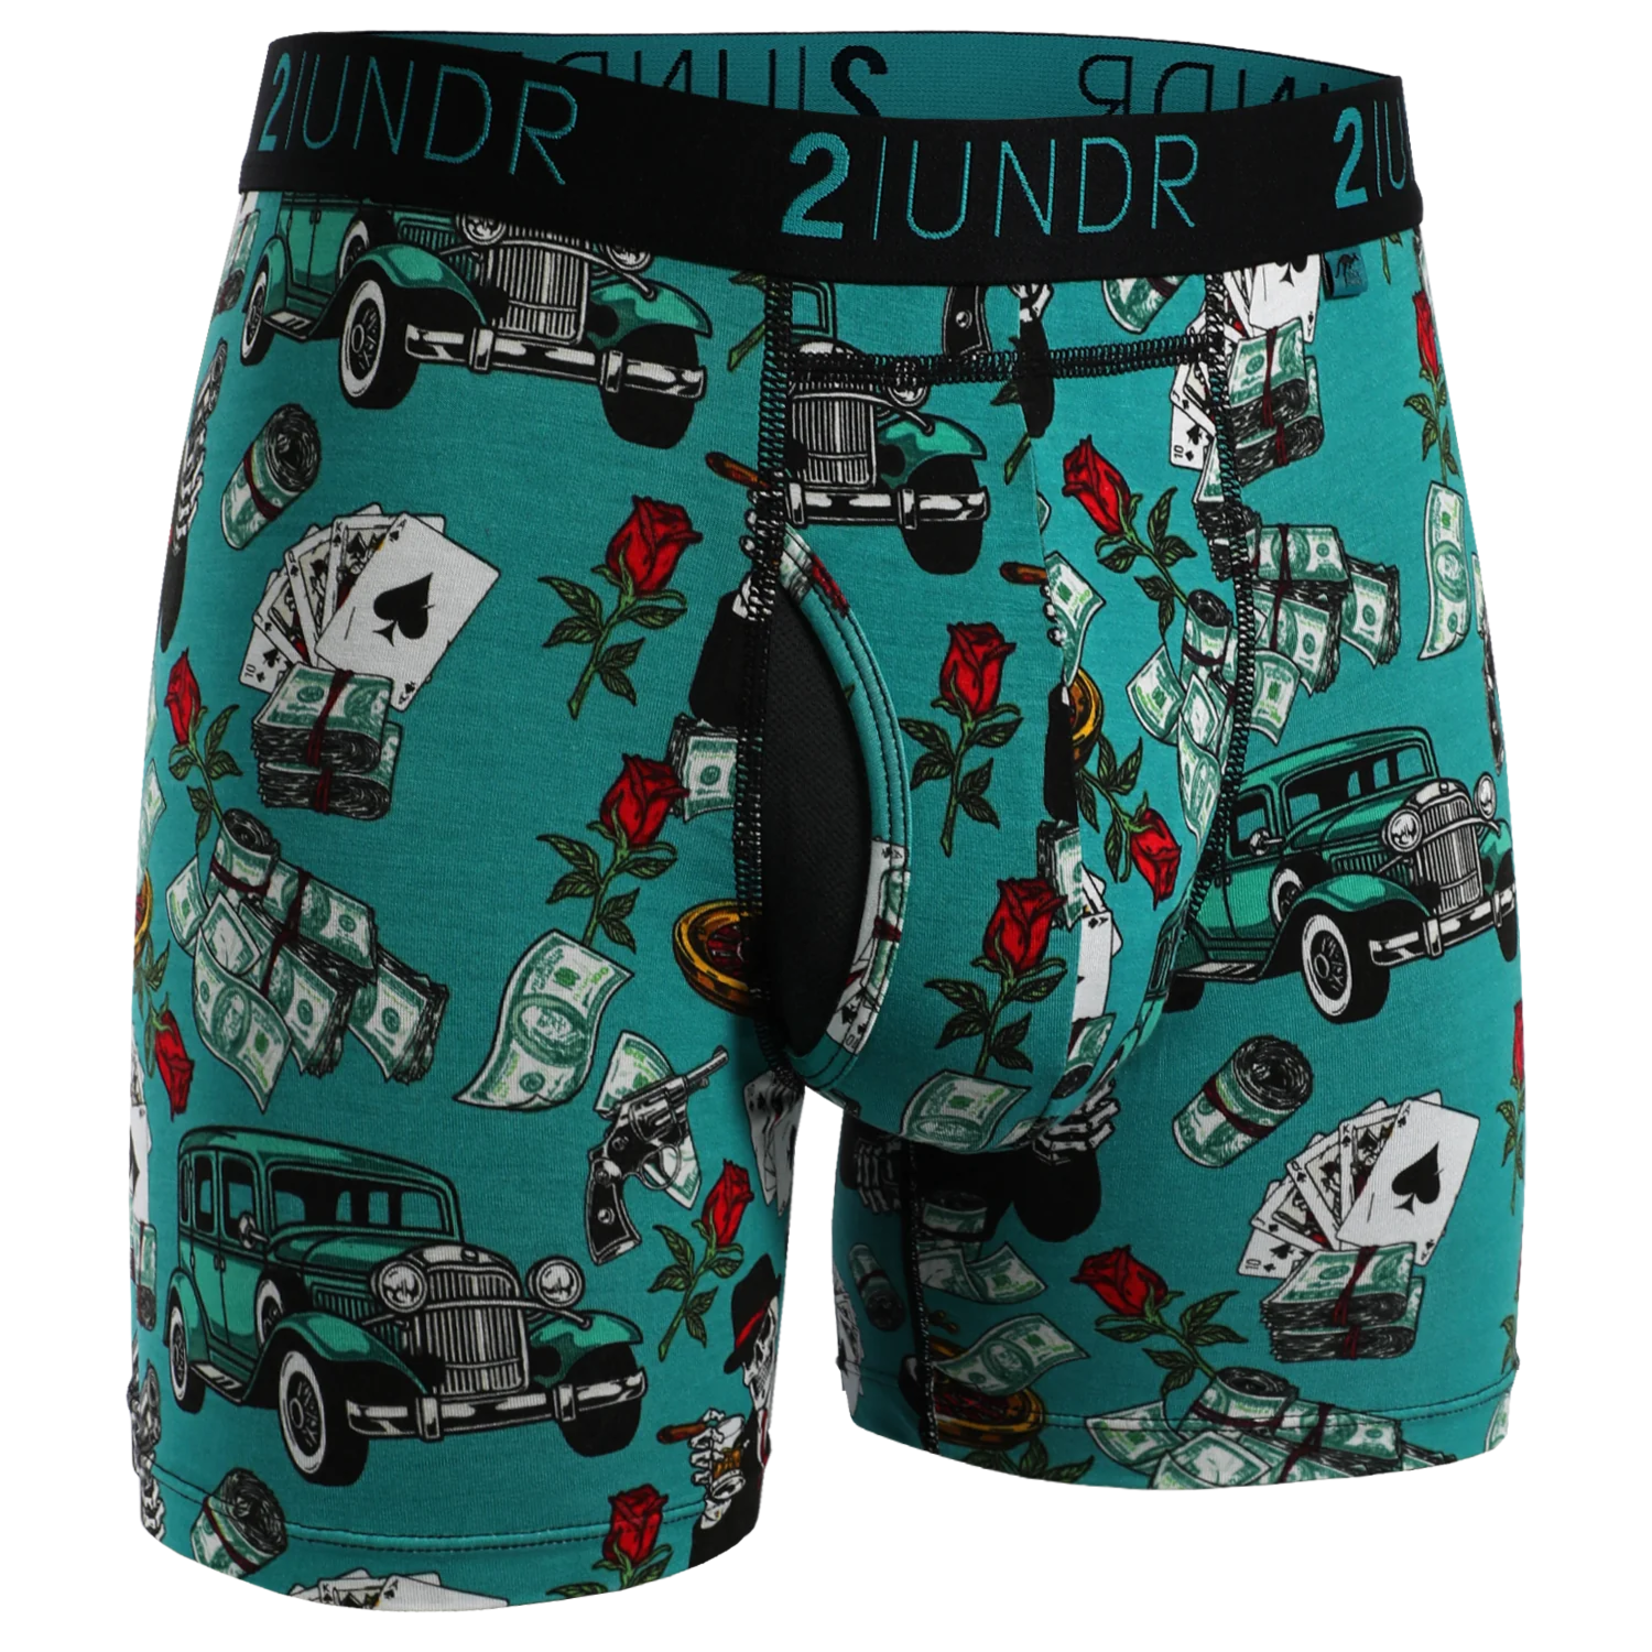 2UNDR SWING SHIFT BOXER BRIEF 2 PACK - MOBSTERS - VEGAS